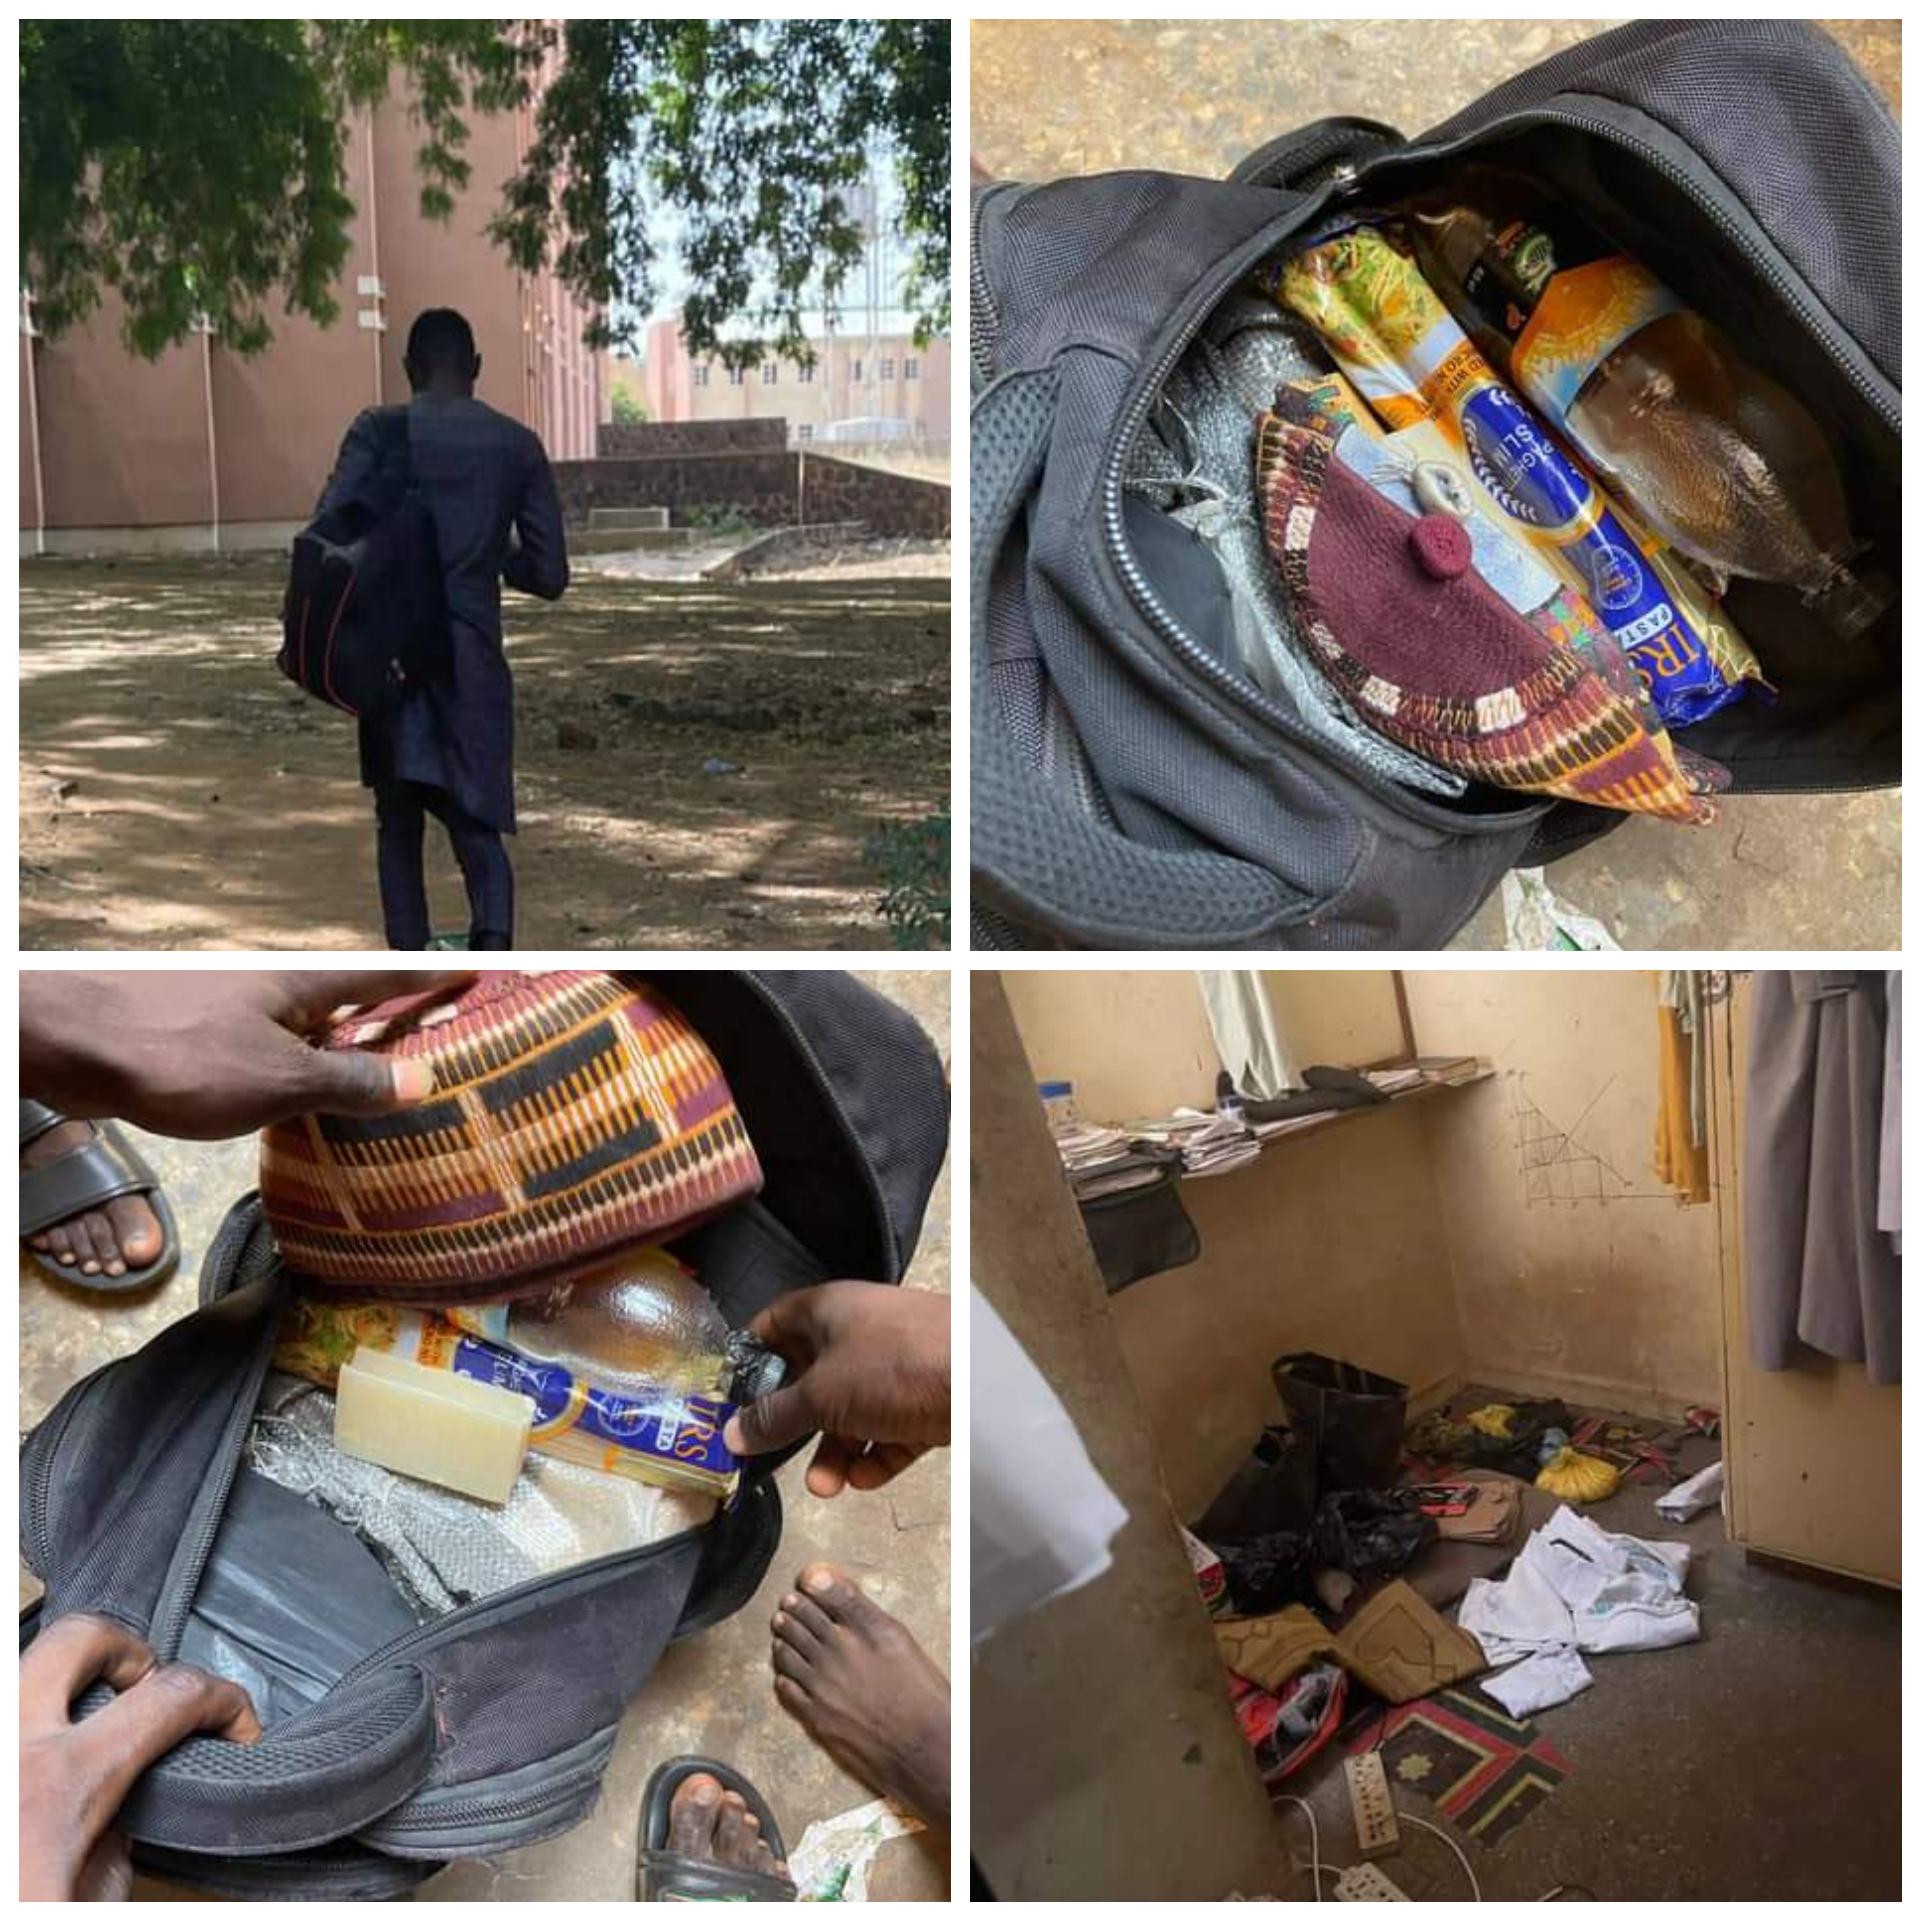 Suspected serial thief allegedly caught stealing food items in Sokoto varsity hostel